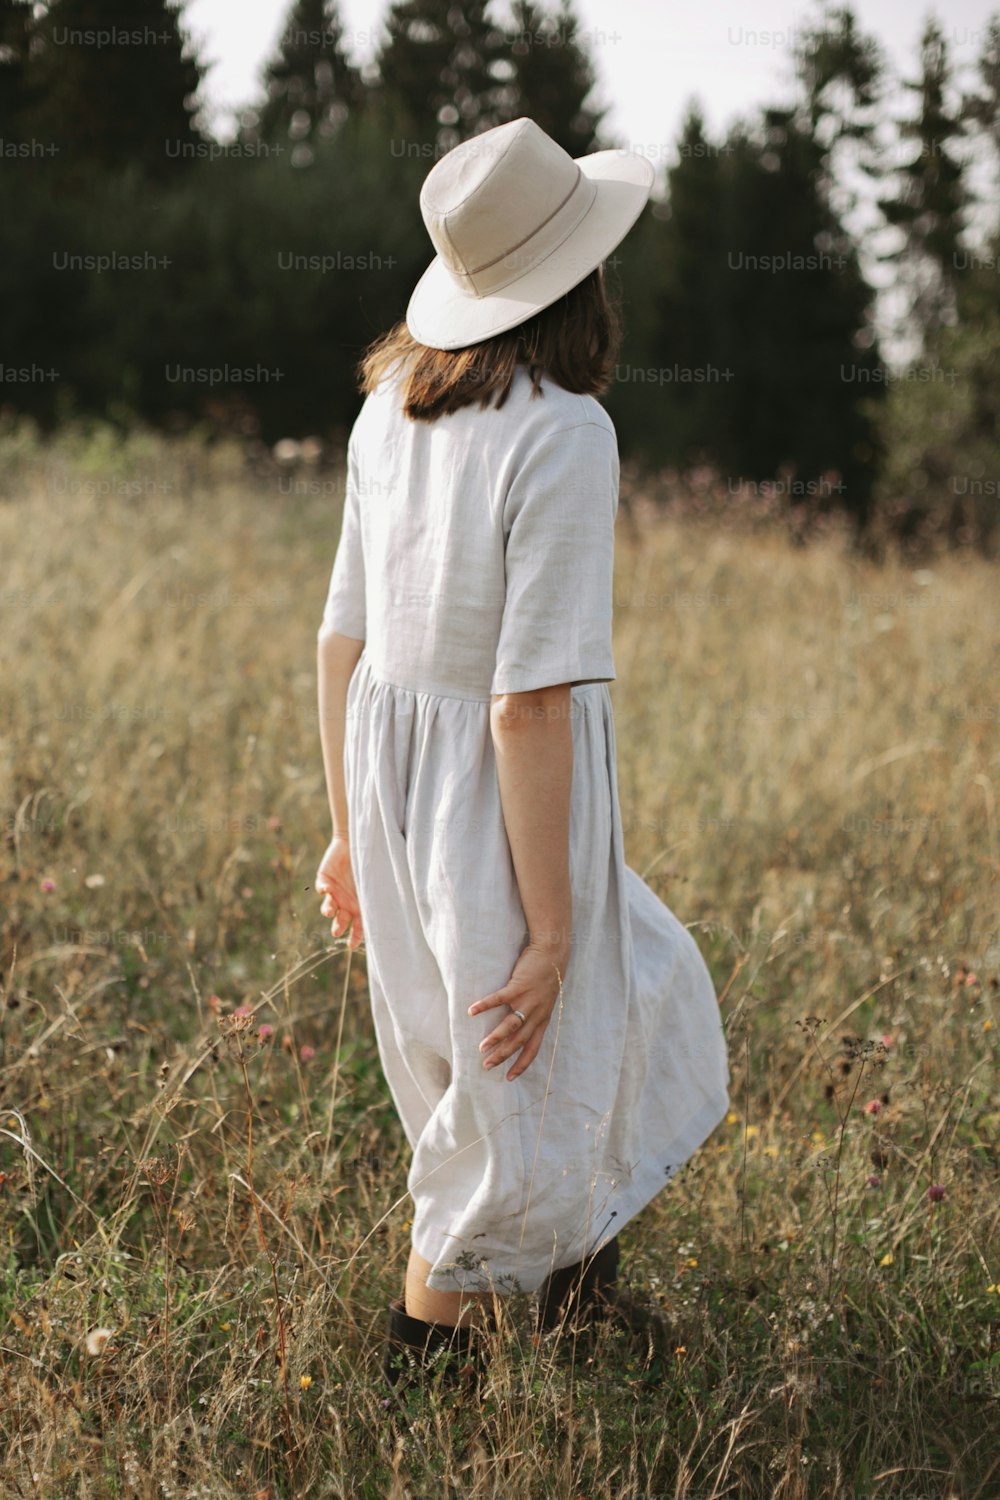 Stylish girl in linen dress and hat walking among herbs and wildflowers, looking at field. Boho woman relaxing in countryside, simple slow life style.  Atmospheric image